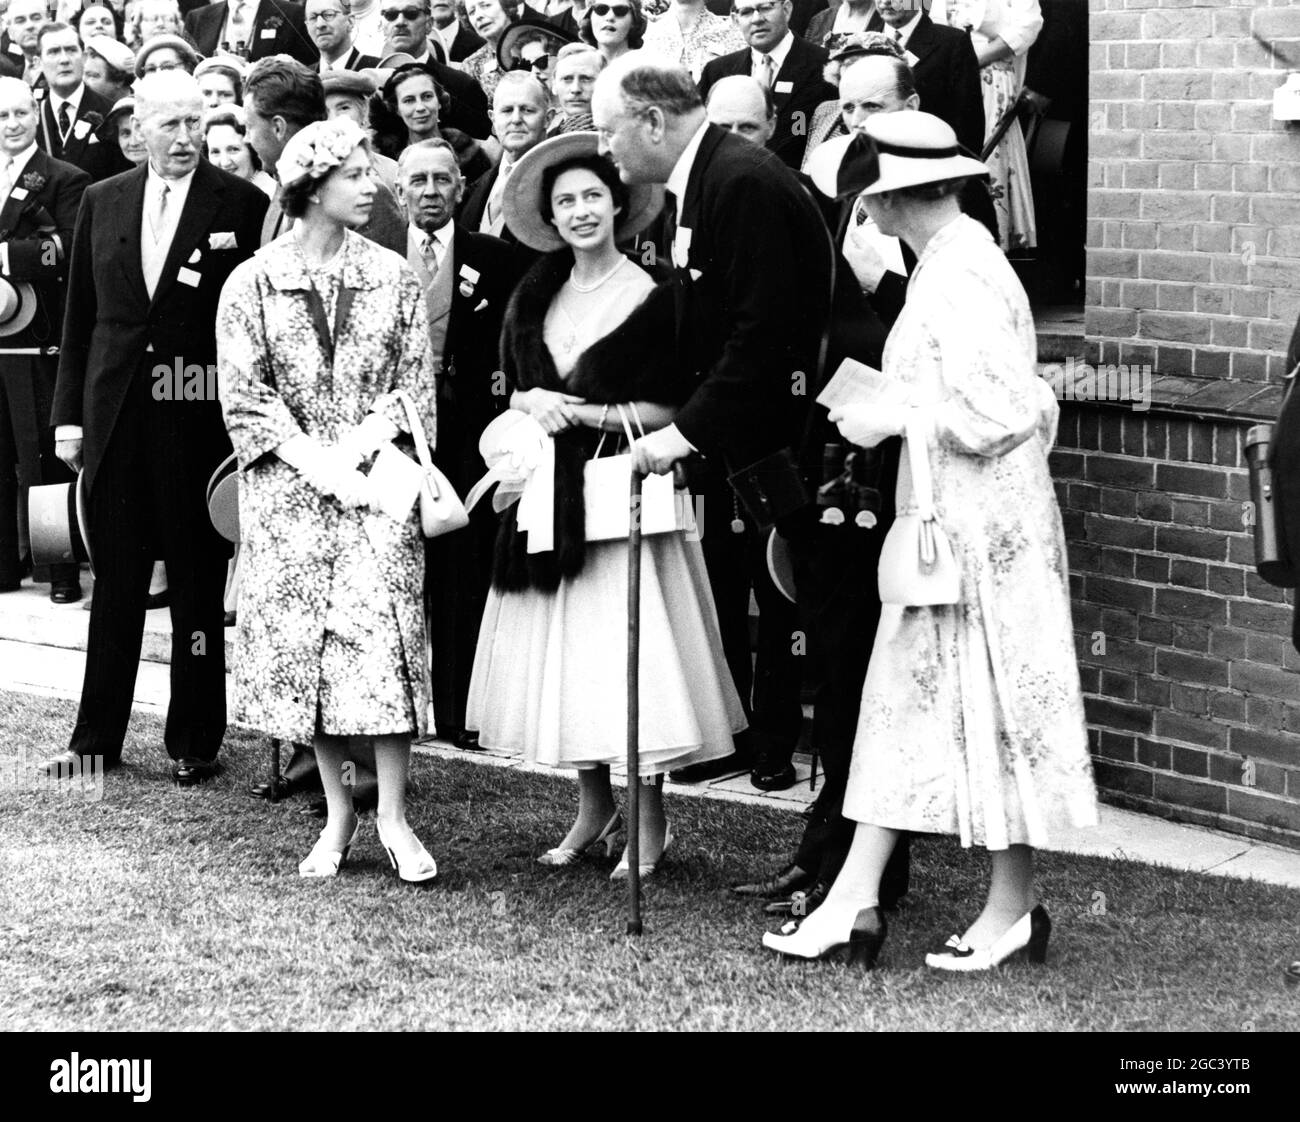 Racing - The Royal Ascot meeting - 2nd day HM Queen Elizabeth II and HRH Princess Margaret chatting to Capt Boyd Rochfort after Her Majesty's  Almeria  had won the Ribblesdale stakes 19 June 1957 Stock Photo